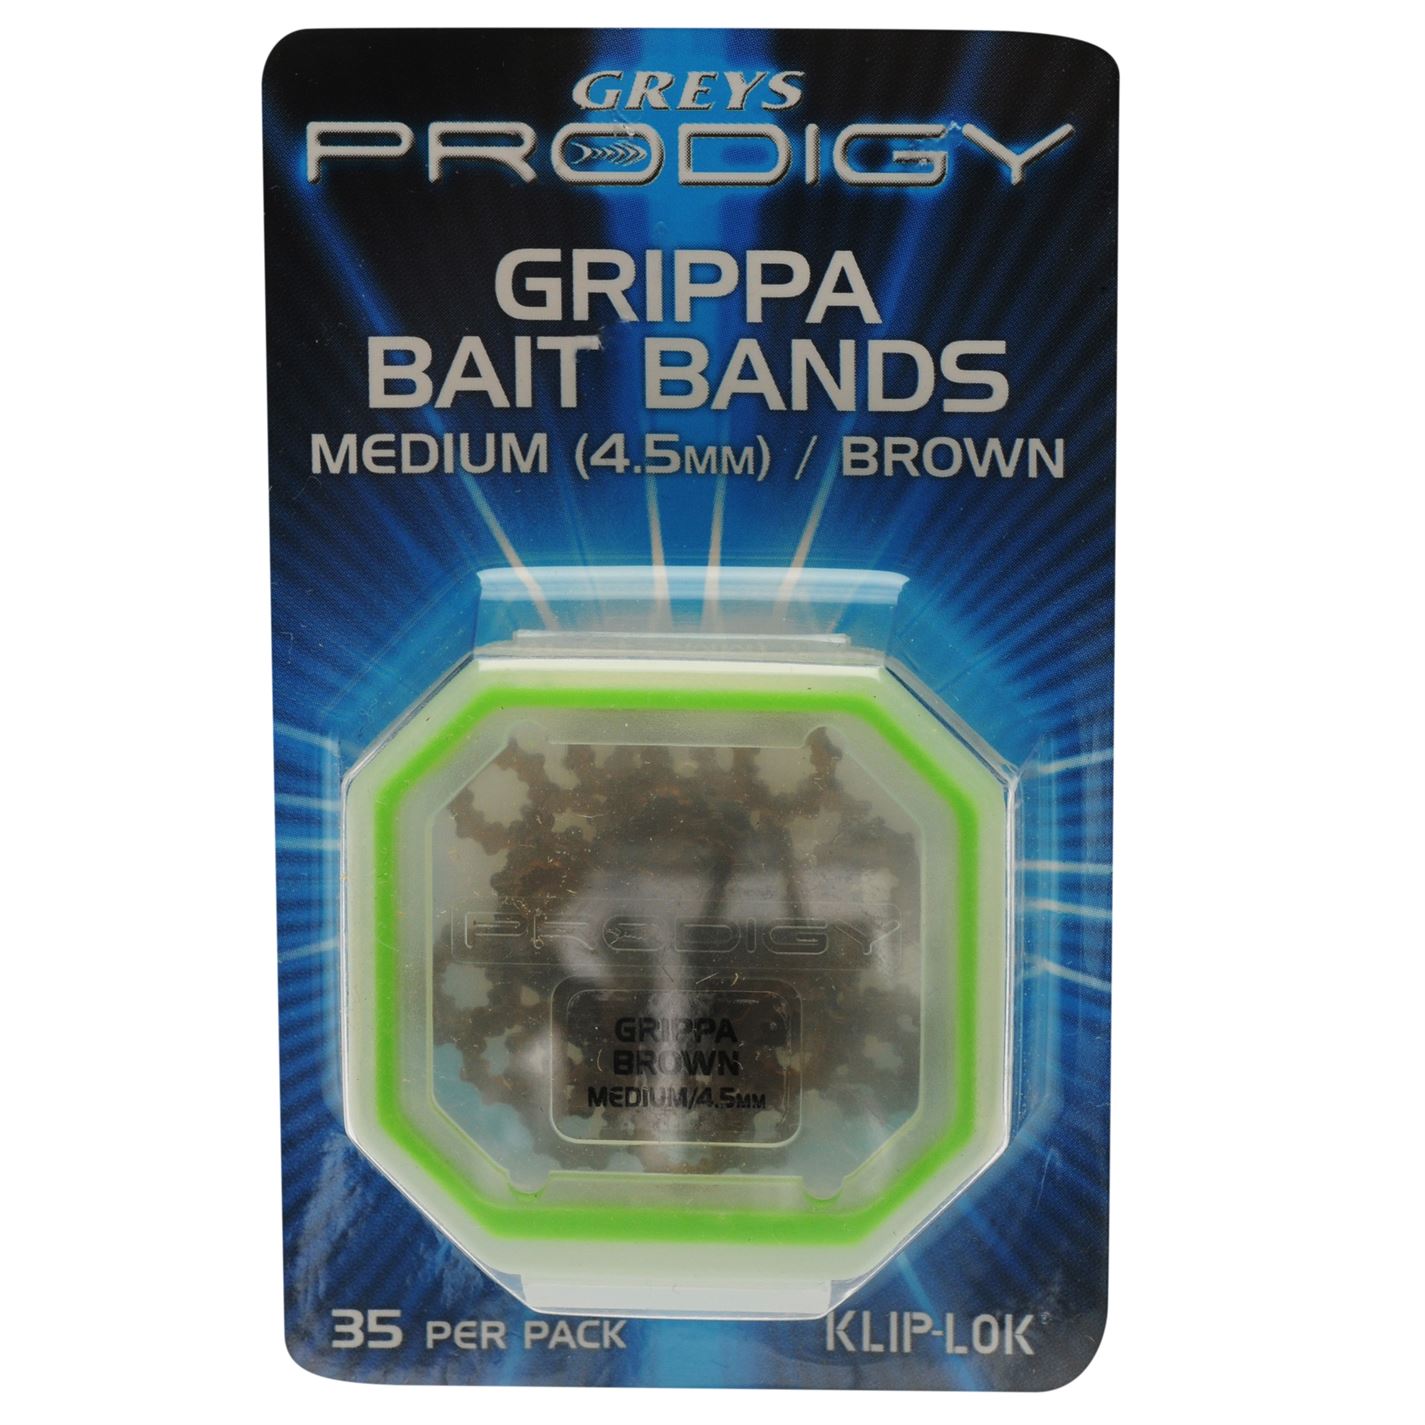 Greys Prodigy Grippa Bait Bands Accesorii pescuit in apa dulce